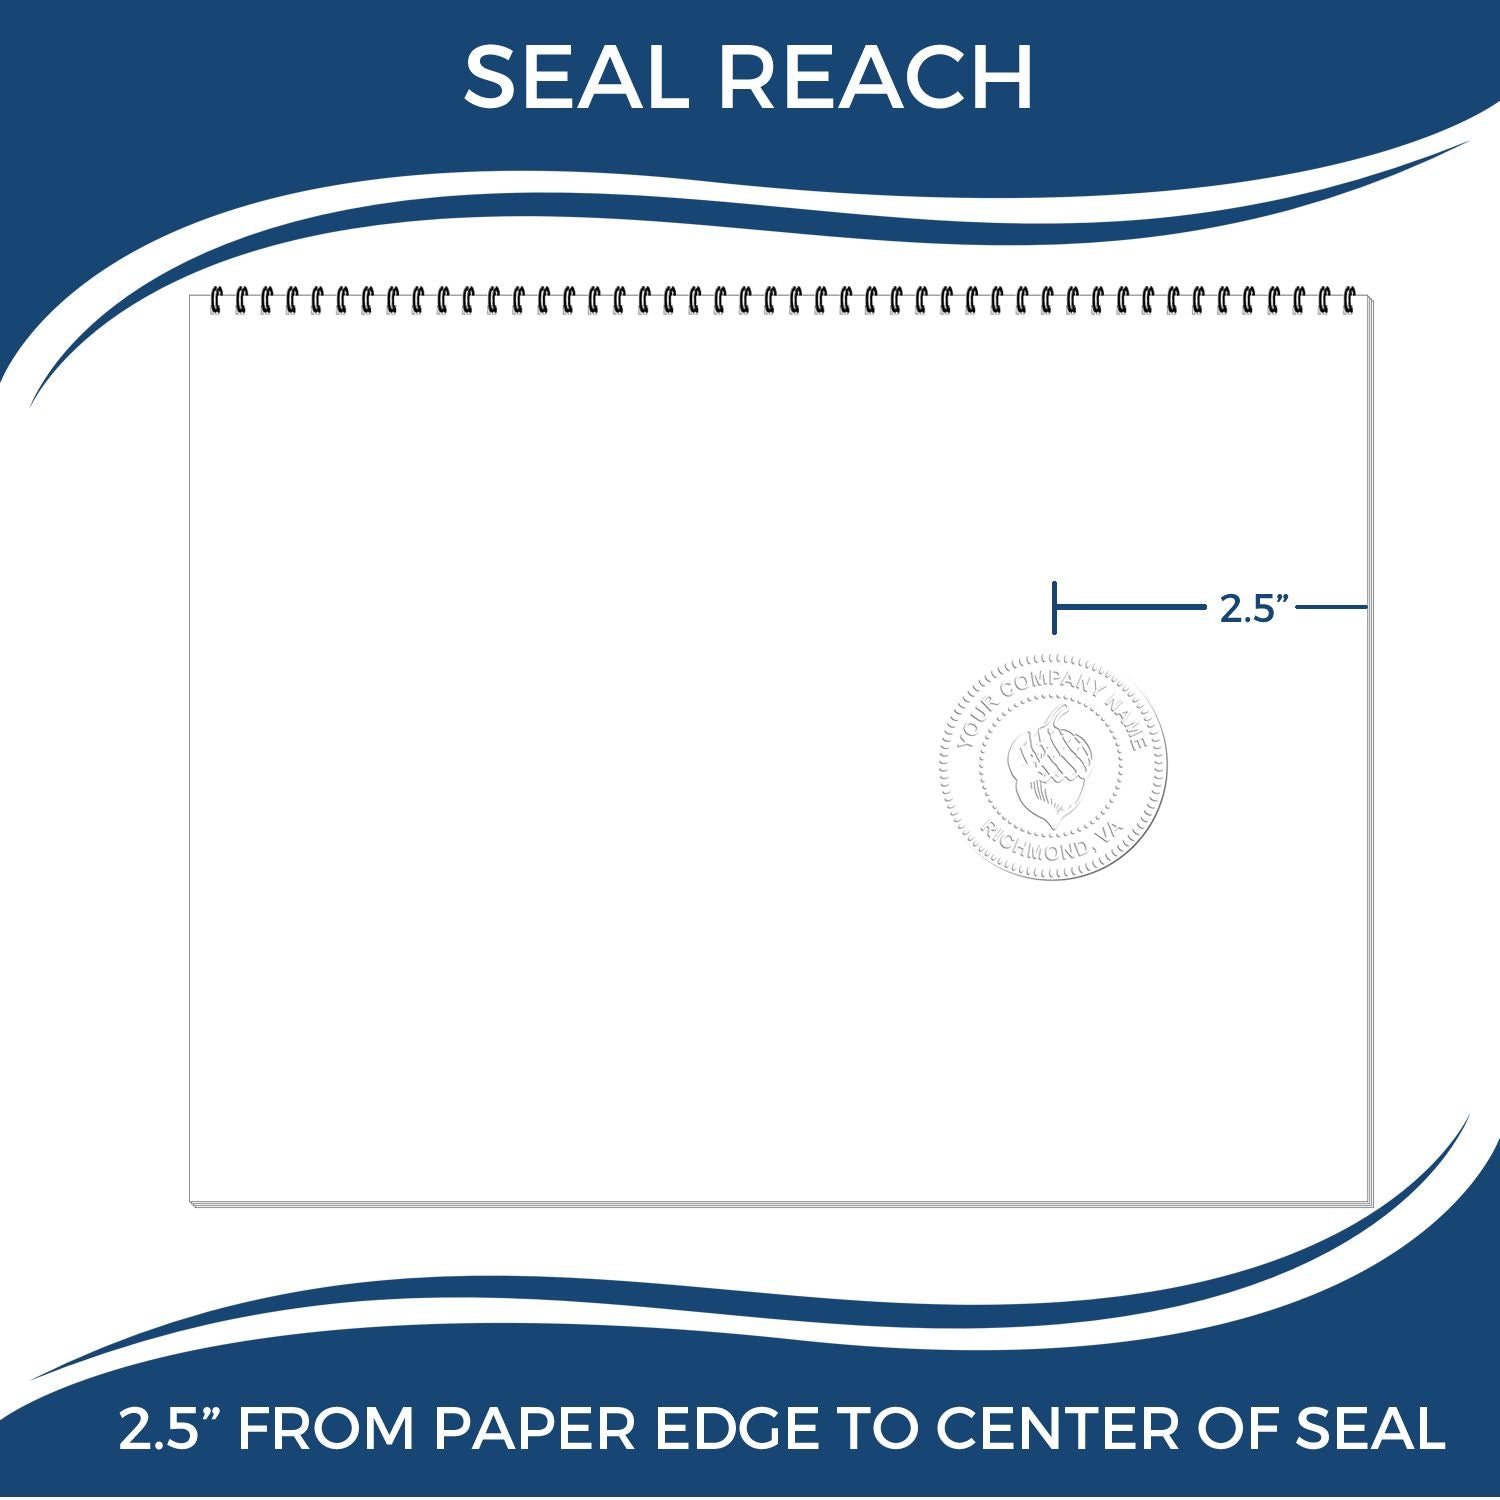 An infographic showing the seal reach which is represented by a ruler and a miniature seal image of the Heavy Duty Cast Iron New York Land Surveyor Seal Embosser